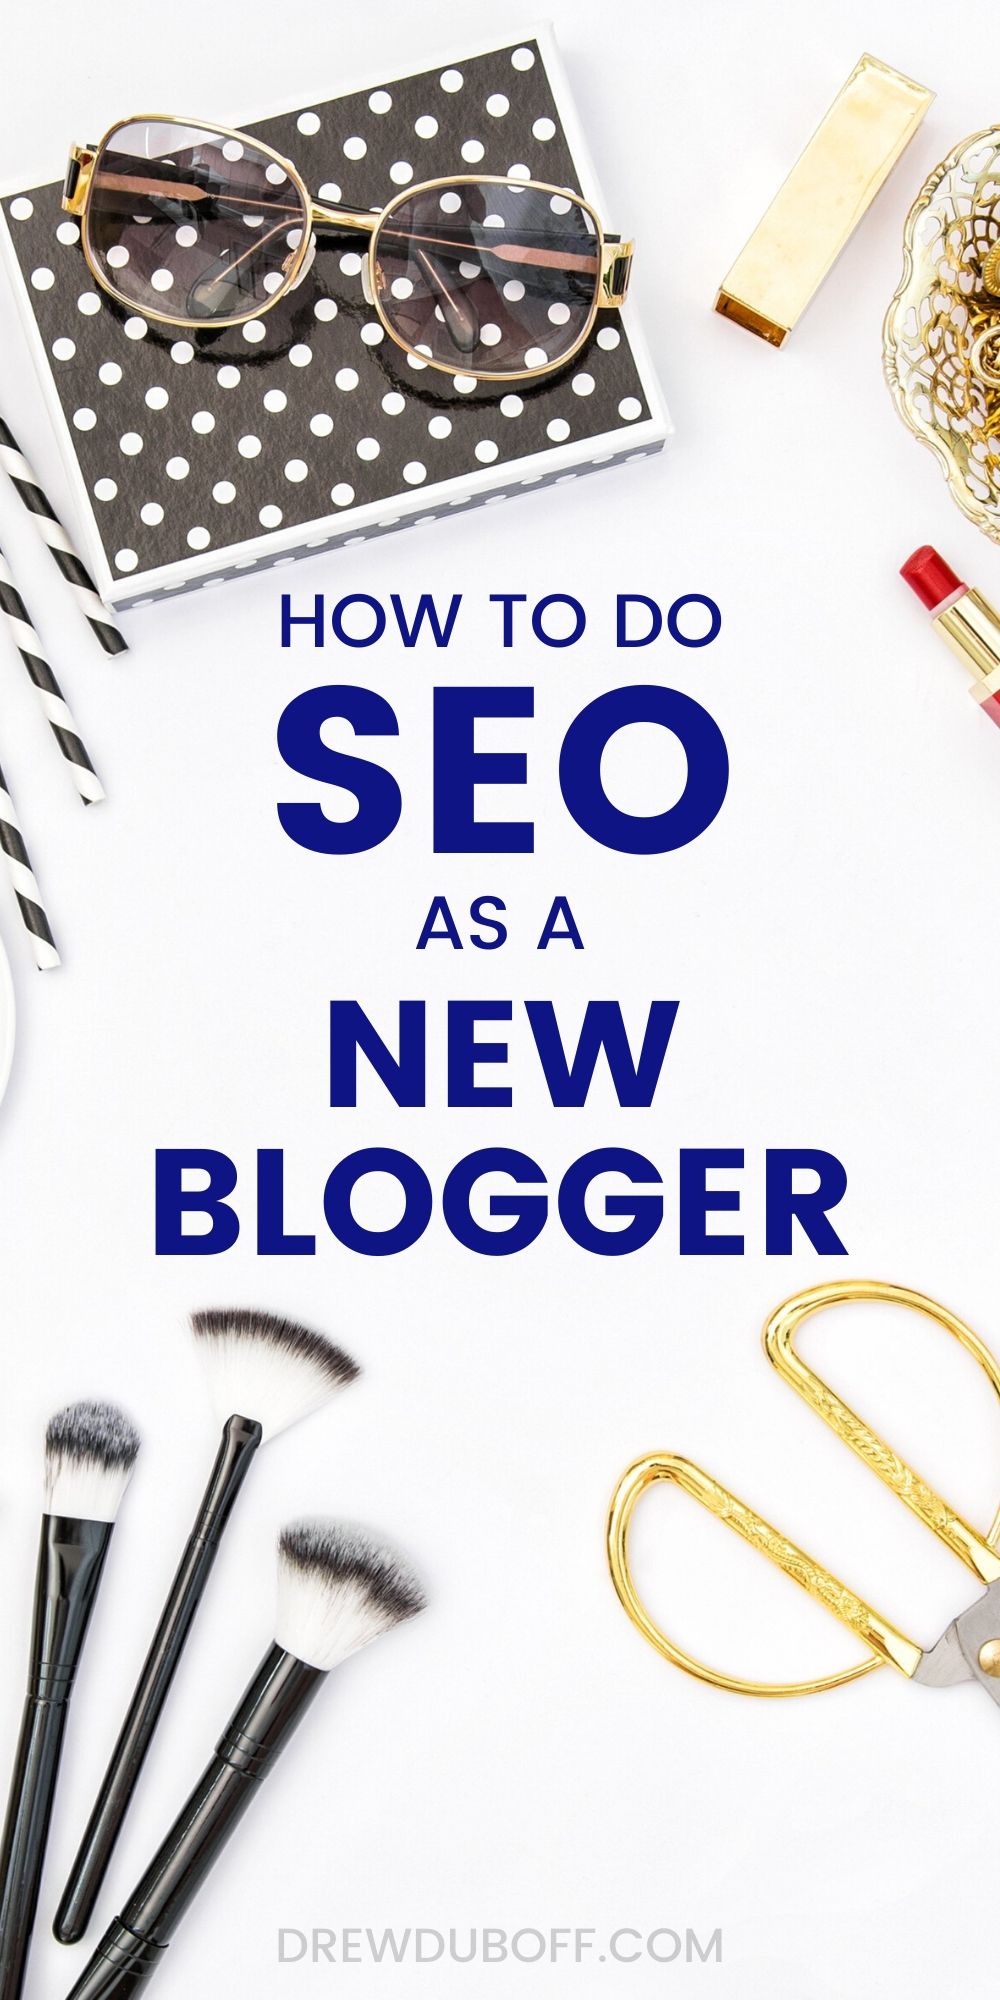 How to Do SEO as a New Blogger